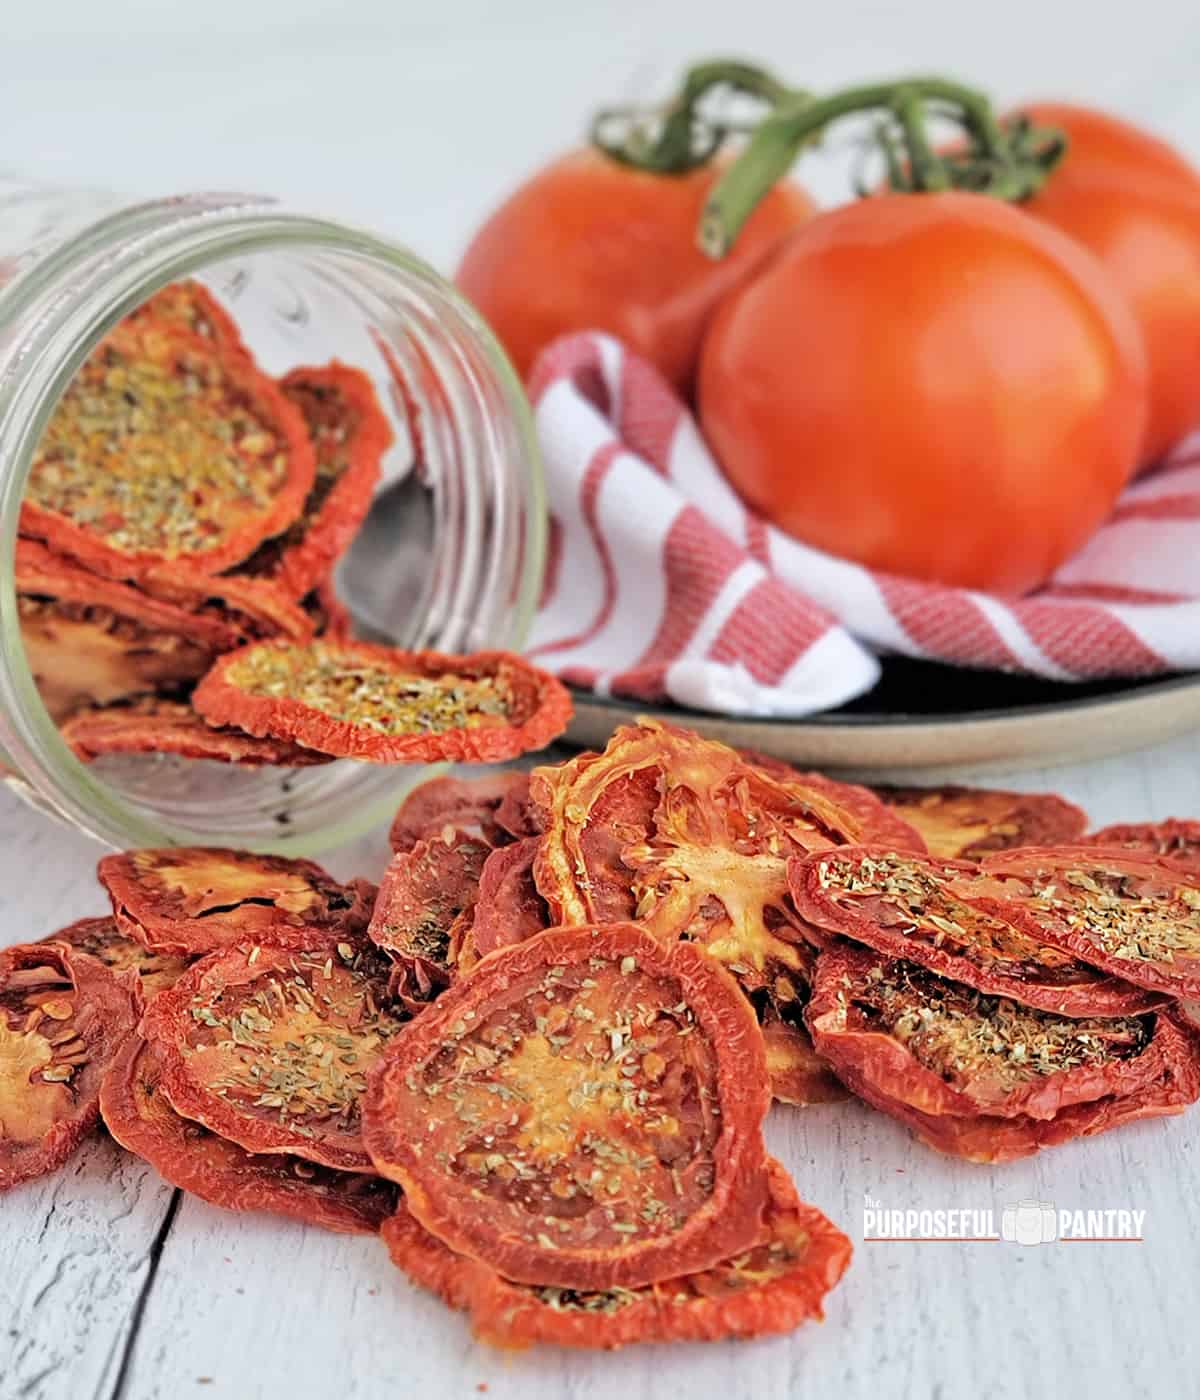 Dried tomato chips spilling onto a table from a jar, fresh tomatoes in the background.